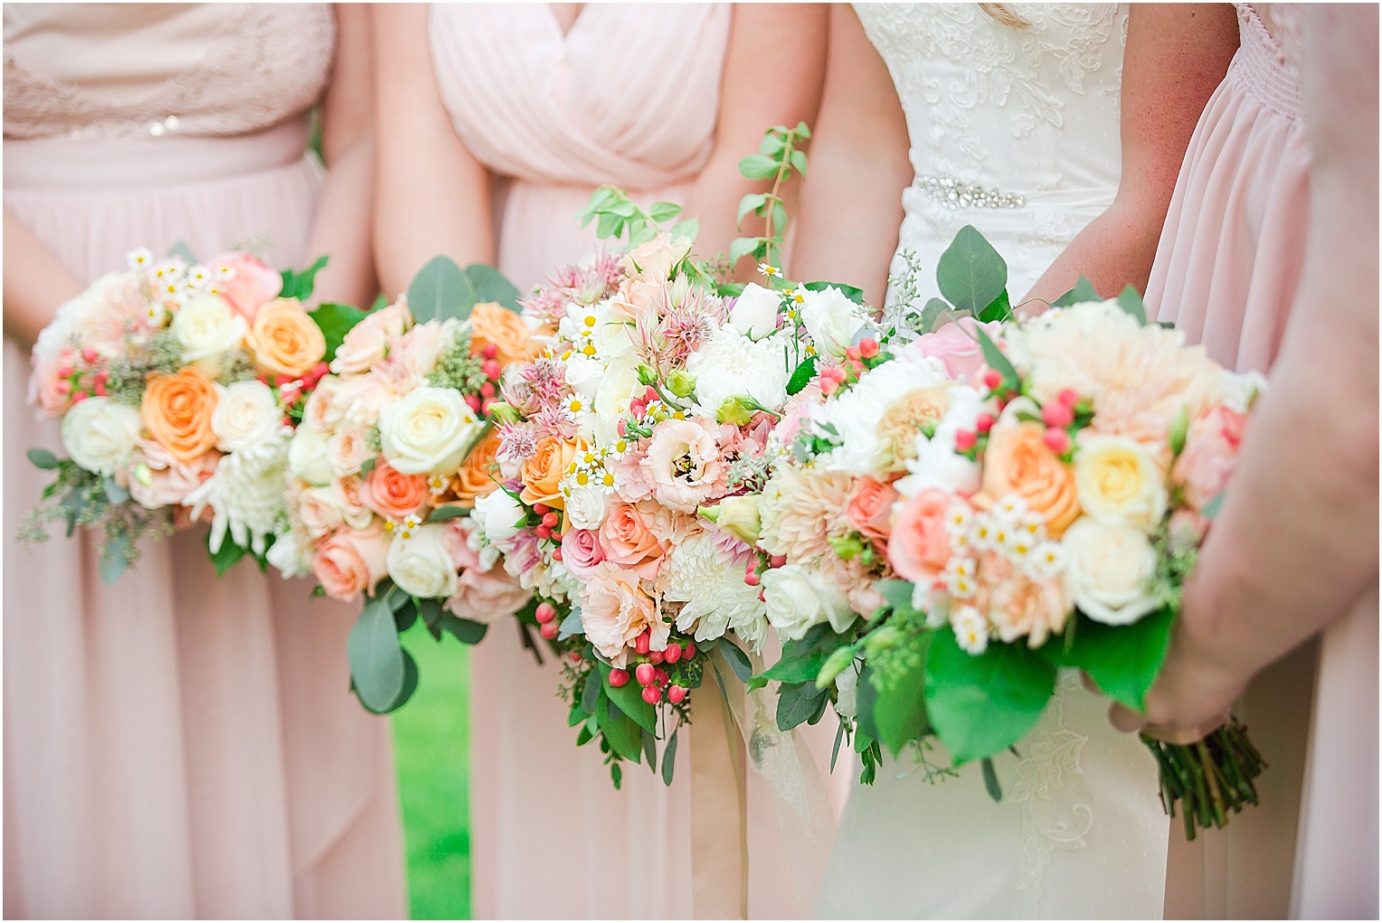 Favorite wedding flowers of 2017 For brides blush and peach wedding flowers